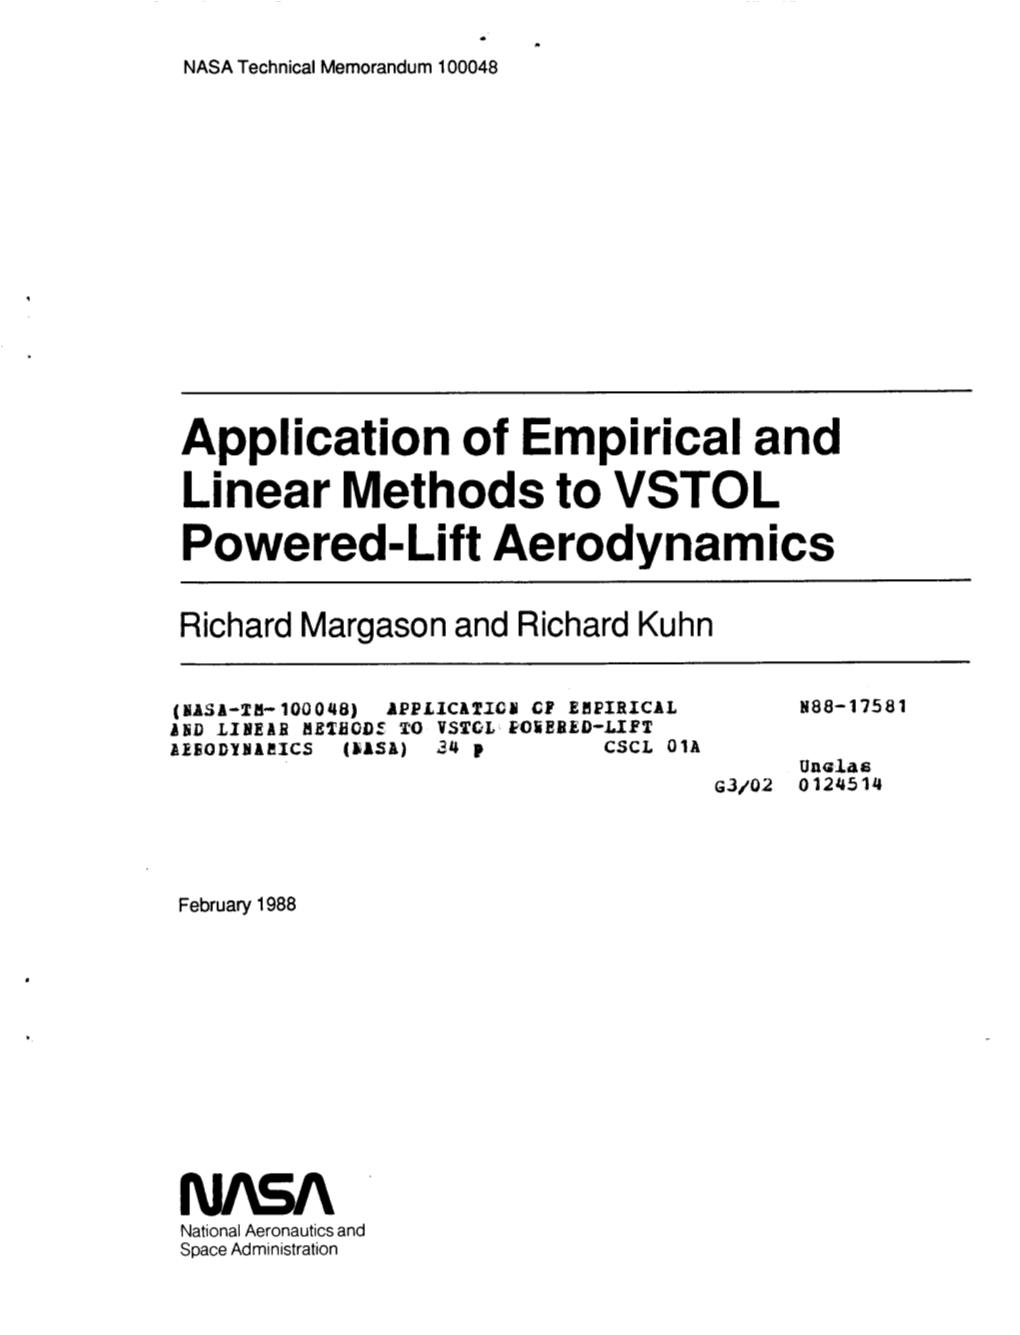 Application of Empirical and Linear Methods to VSTOL Powered-Lift Aerodynamics